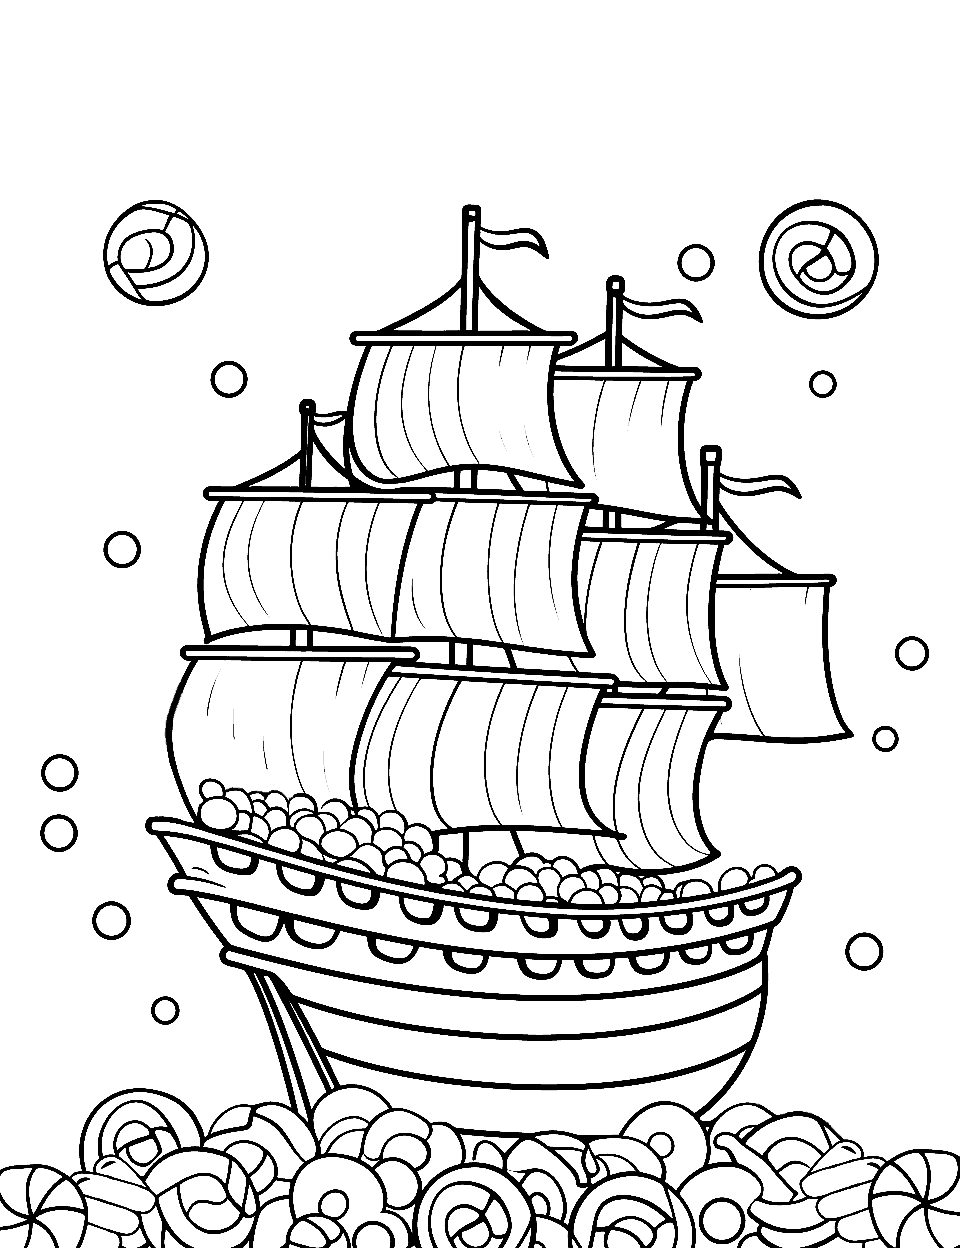 Candy Pirate Ship Coloring Page - A pirate ship full of candy on the high seas made of candy.